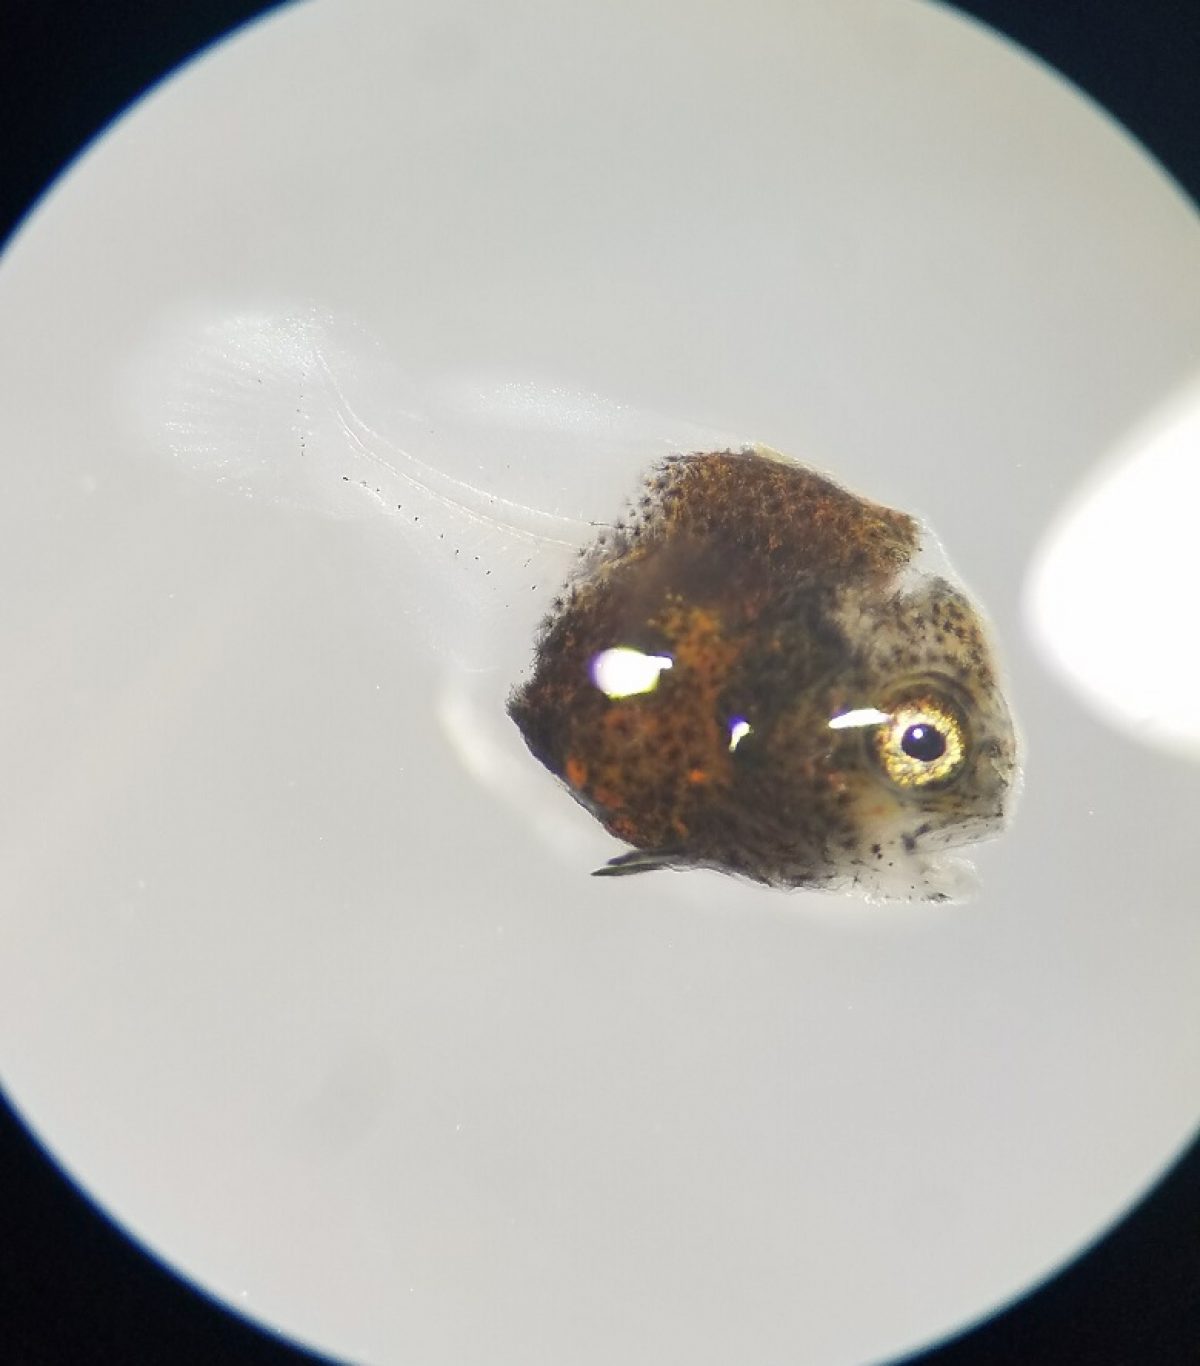 A developing fish being viewed under a microscope